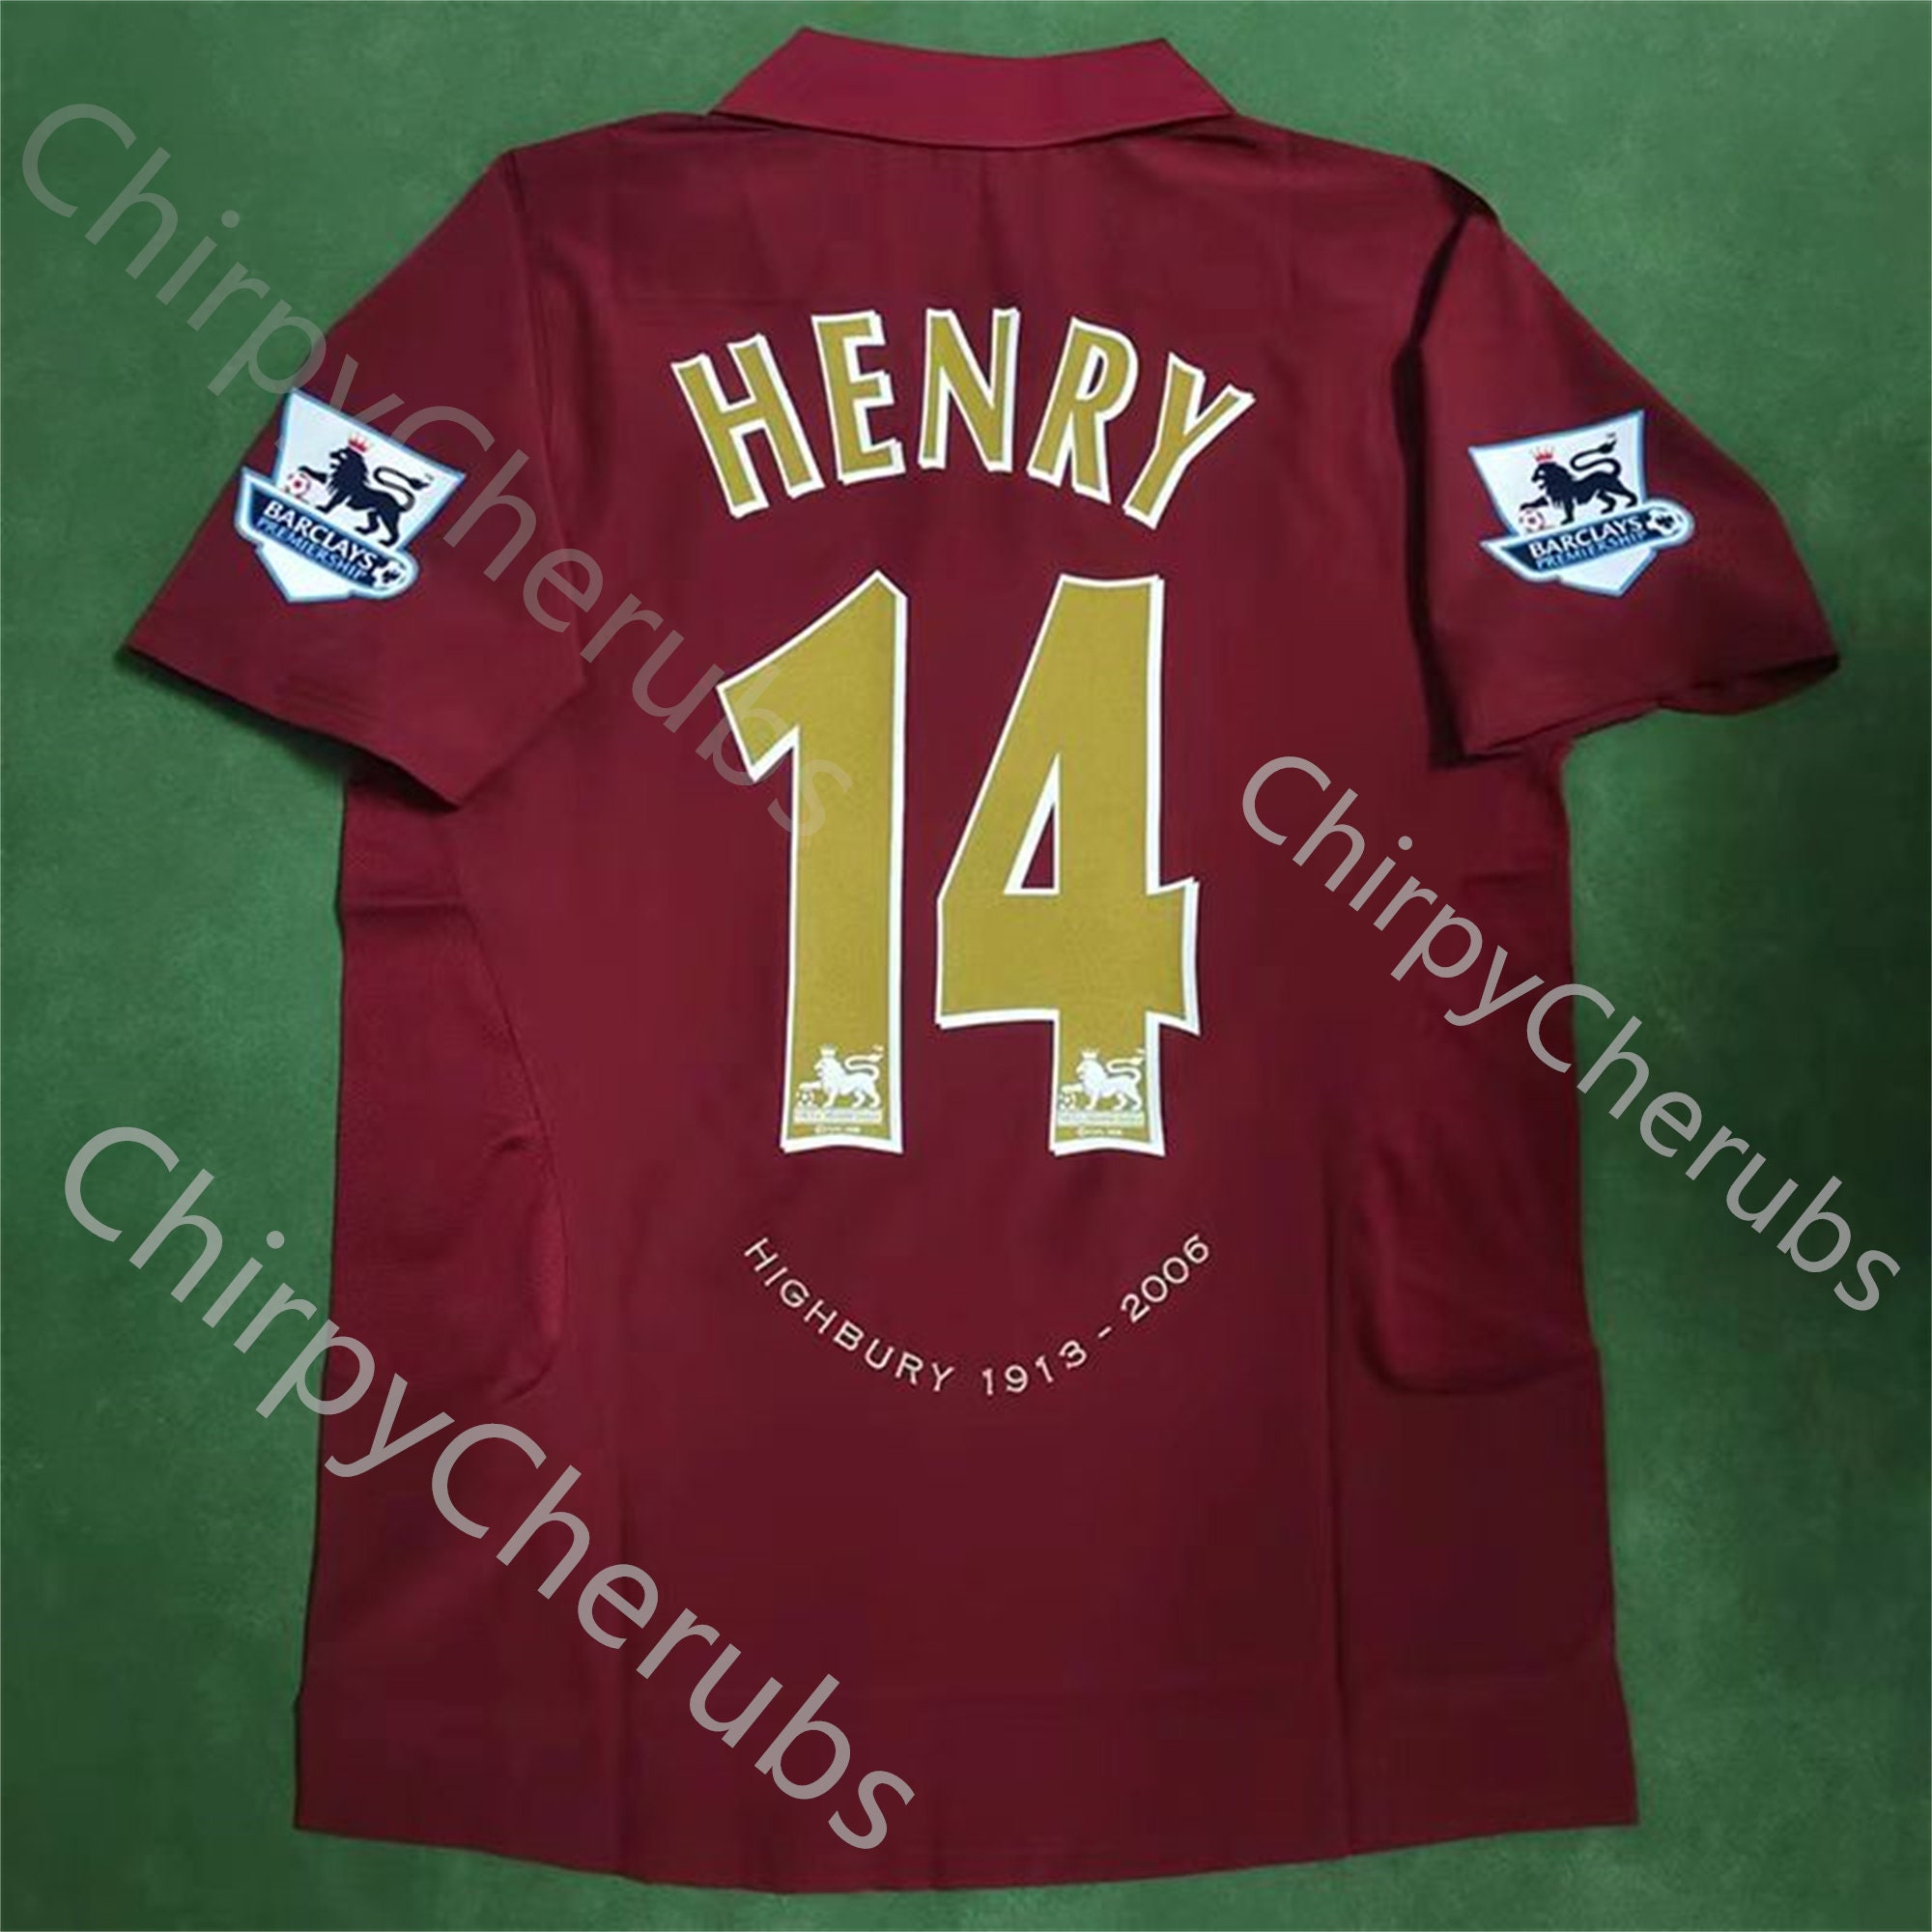 Thierry Henry 2004 Jersey | Photographic Print